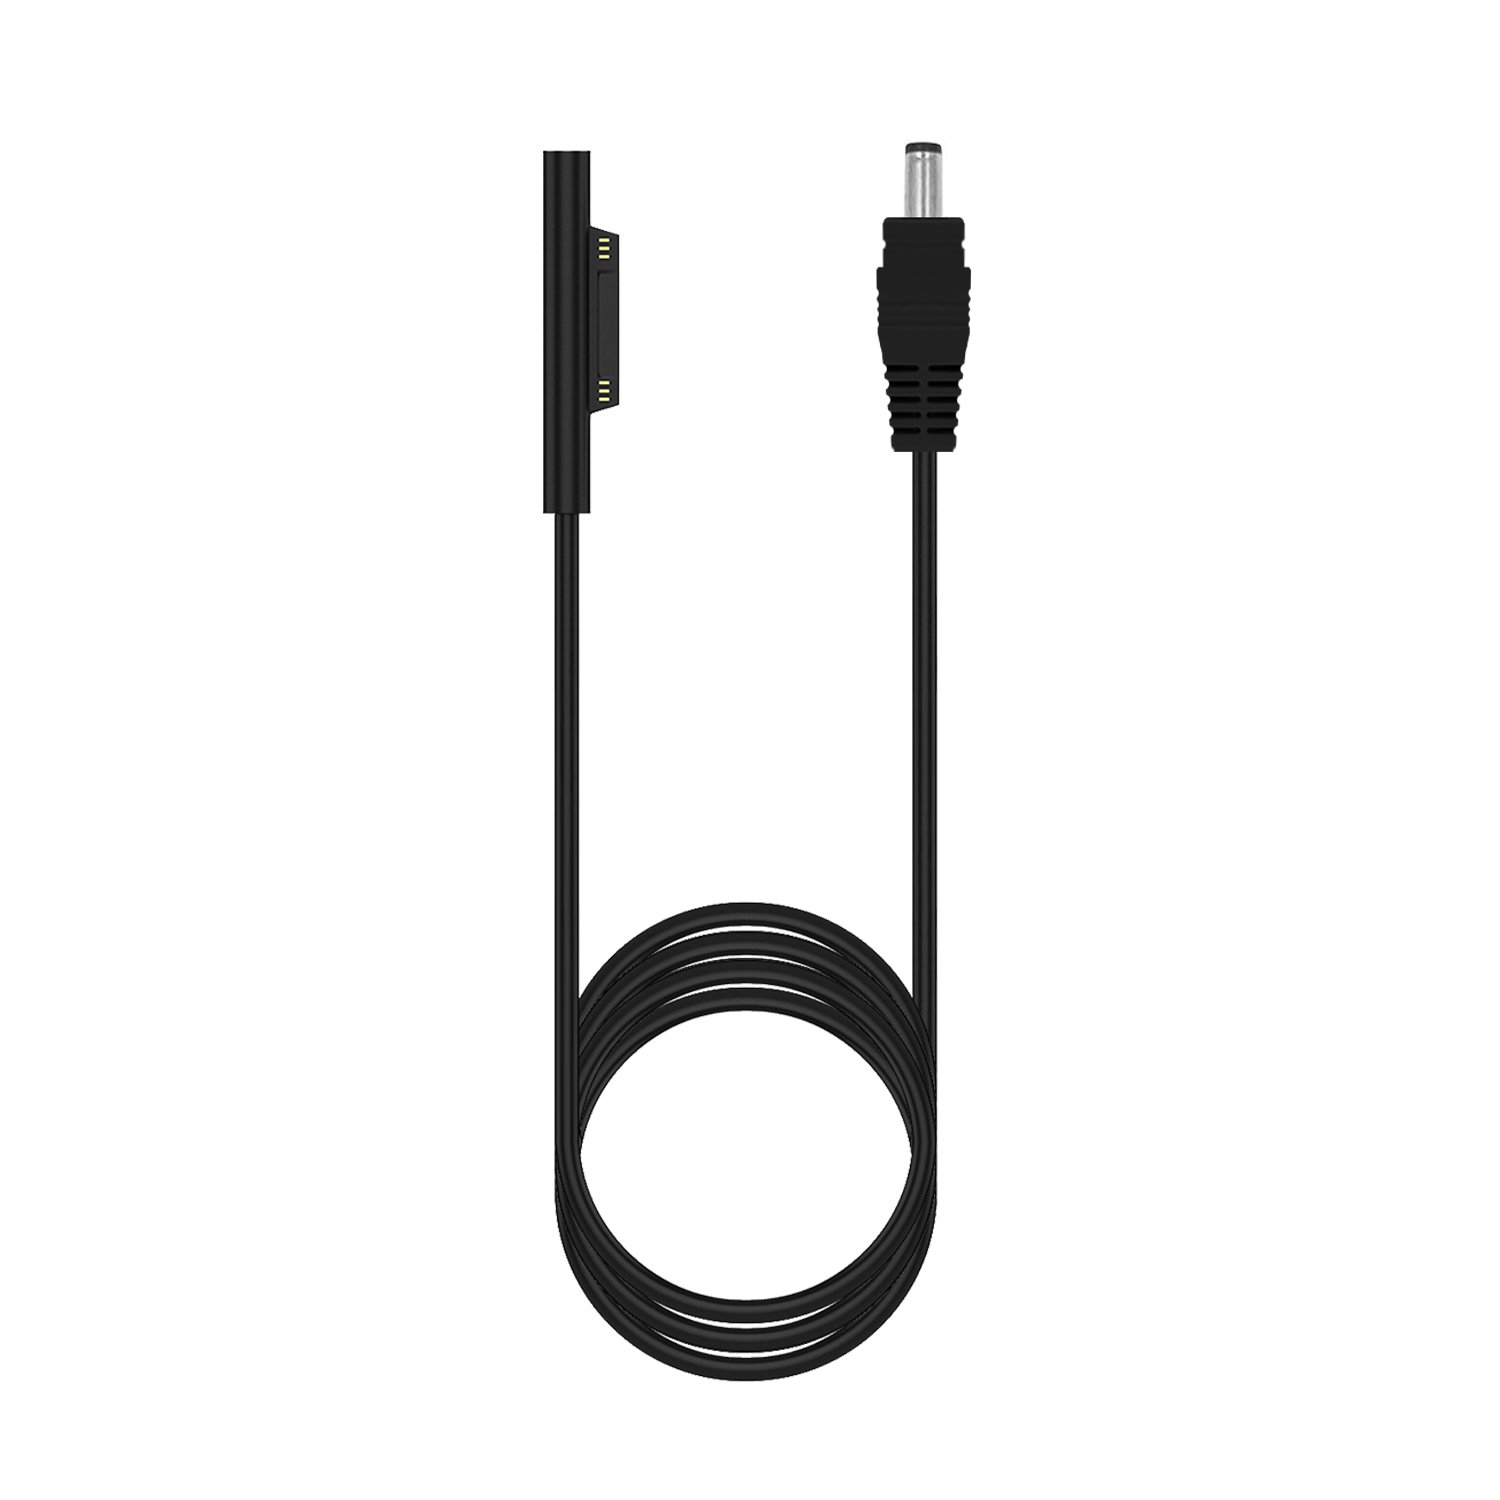 Surface power cord and charger cable